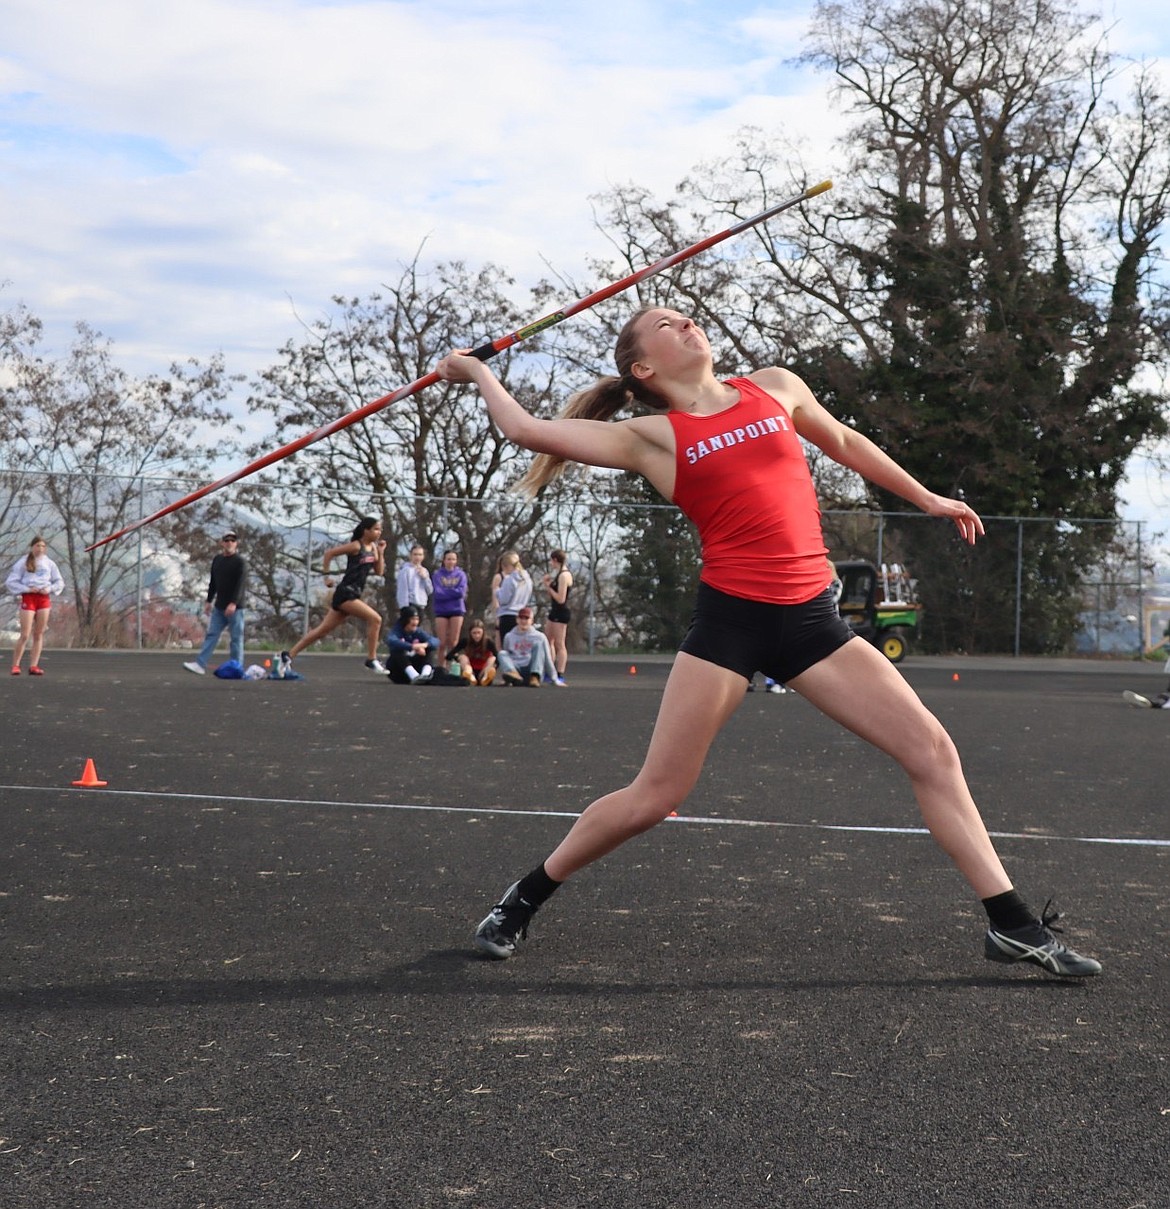 Sandpoint's Alex David fires a javelin at a meet earlier this season. David threw a new personal best mark of 110 feet and six inches at the District 1 Meet of Champions on Thursday, over eight feet further than her previous best.